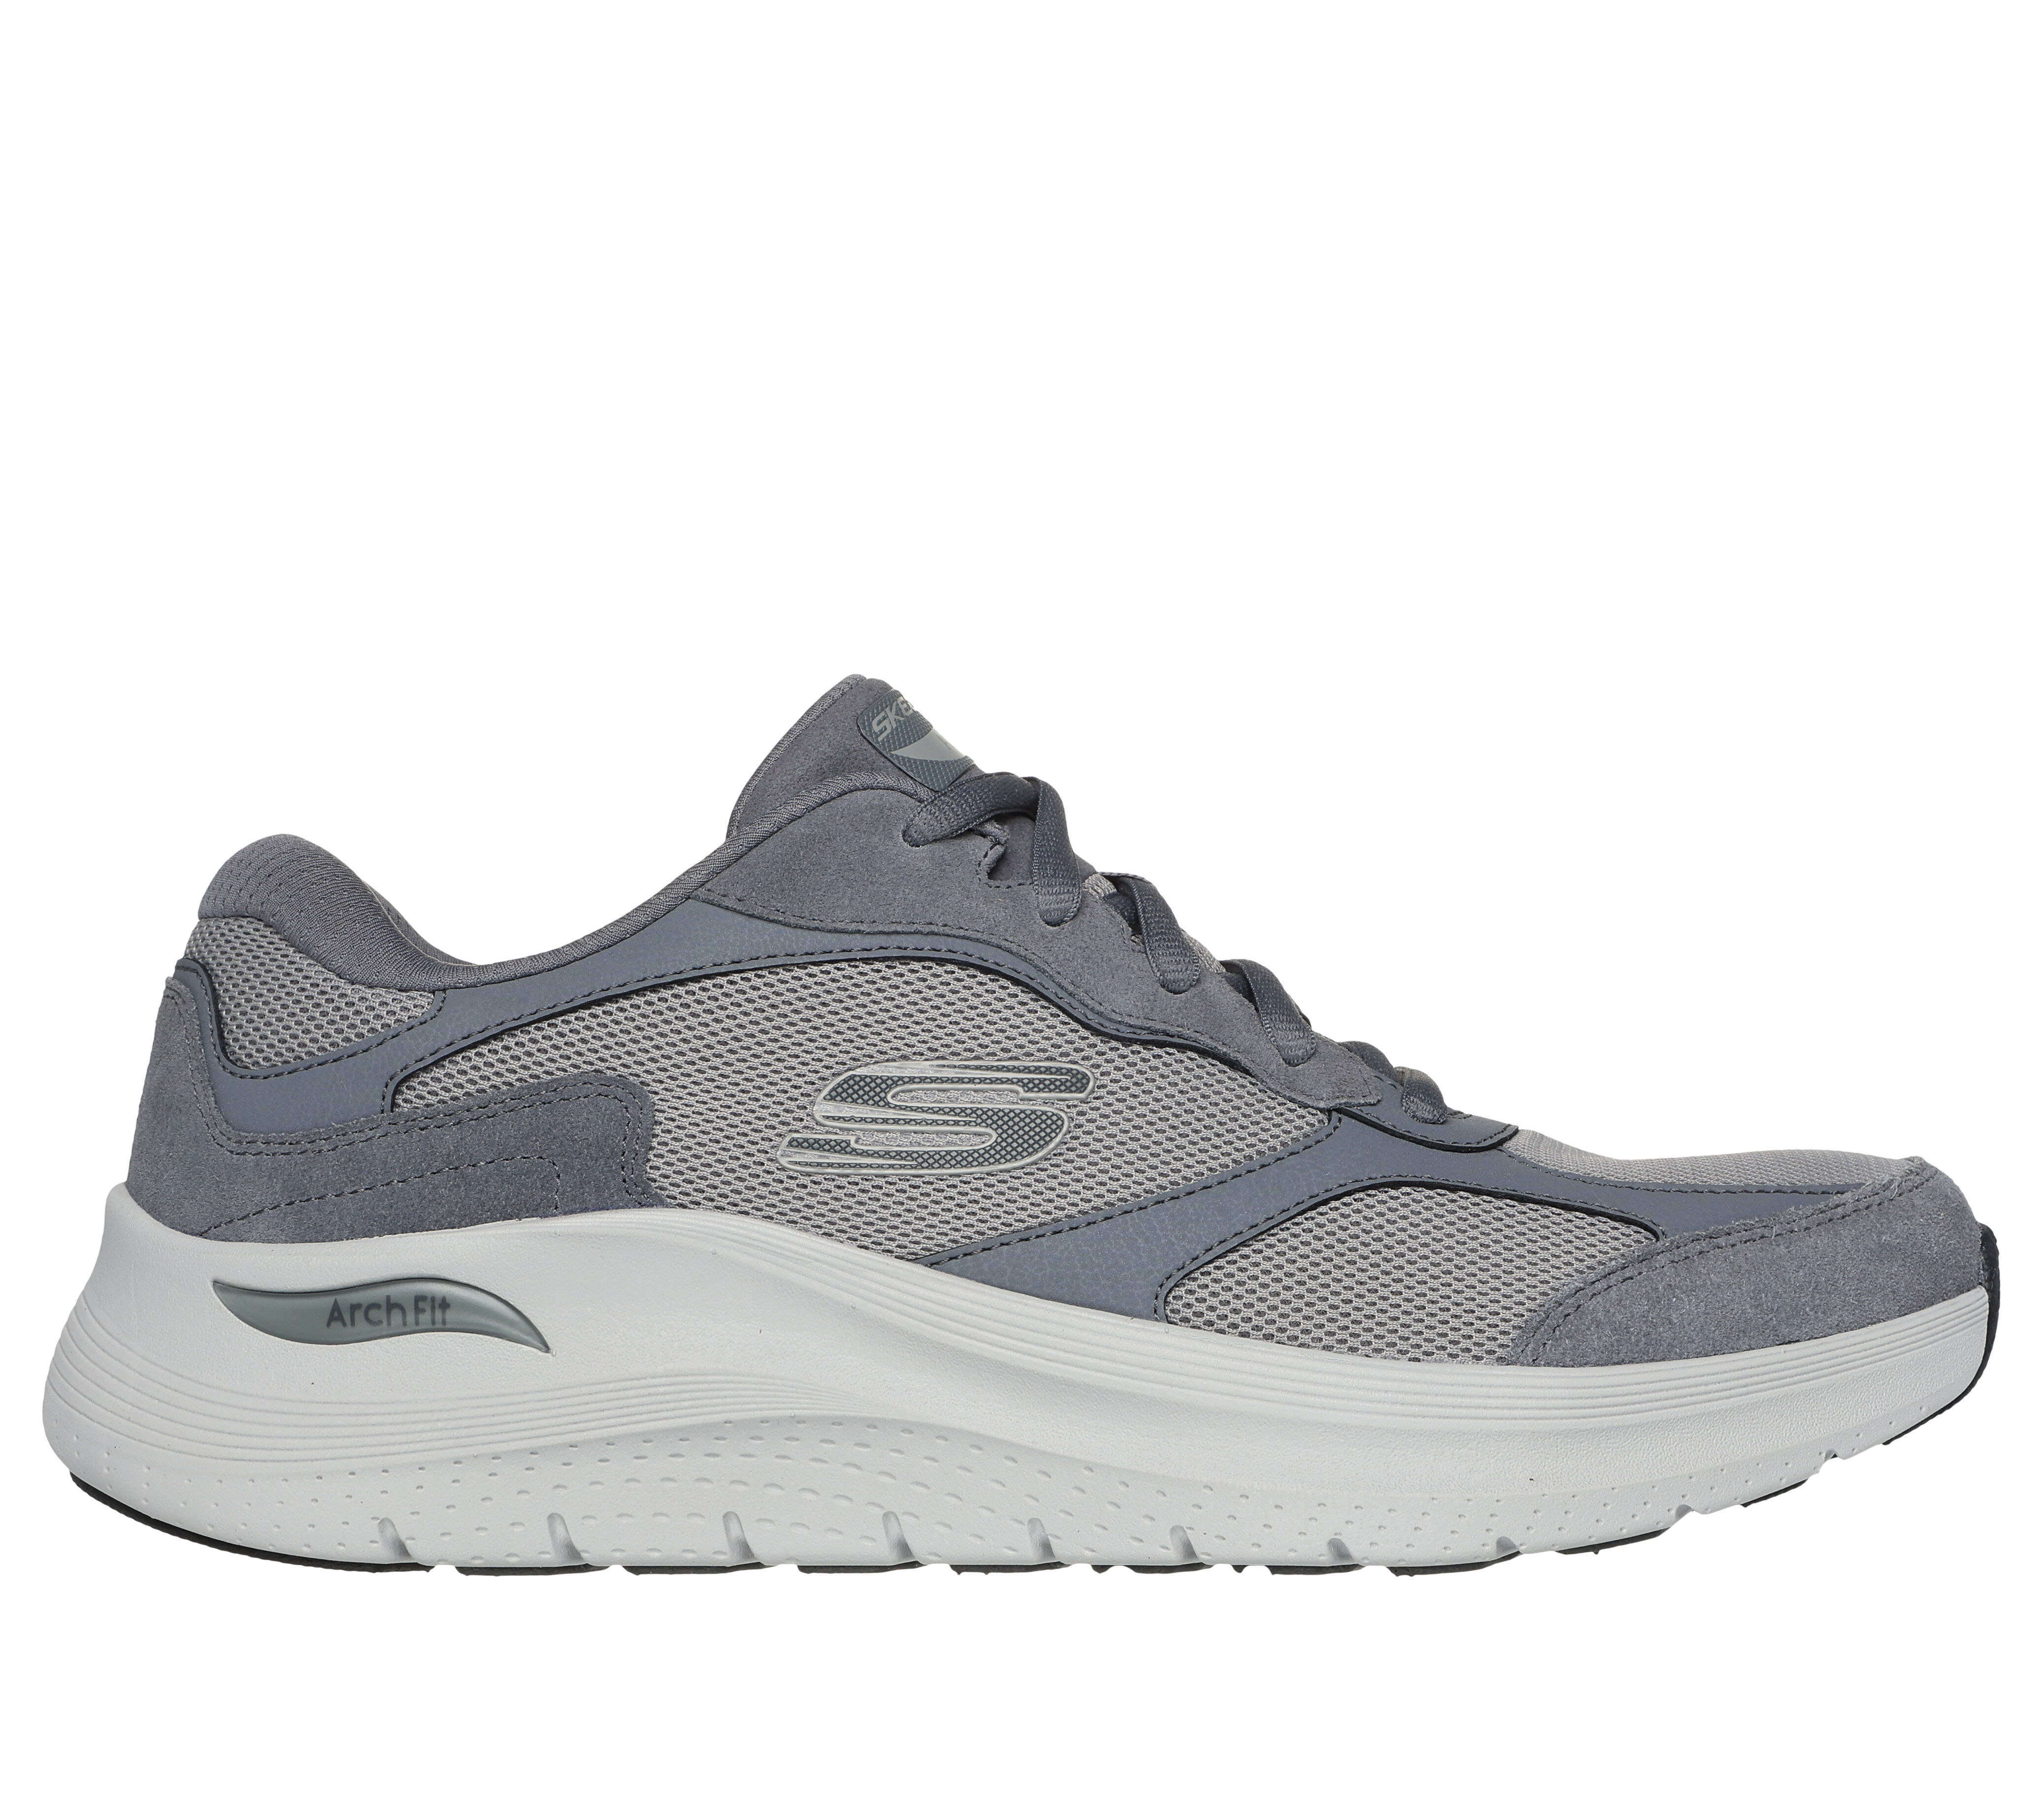 Skechers Arch Fit Men's | Arch Support Shoes | SKECHERS